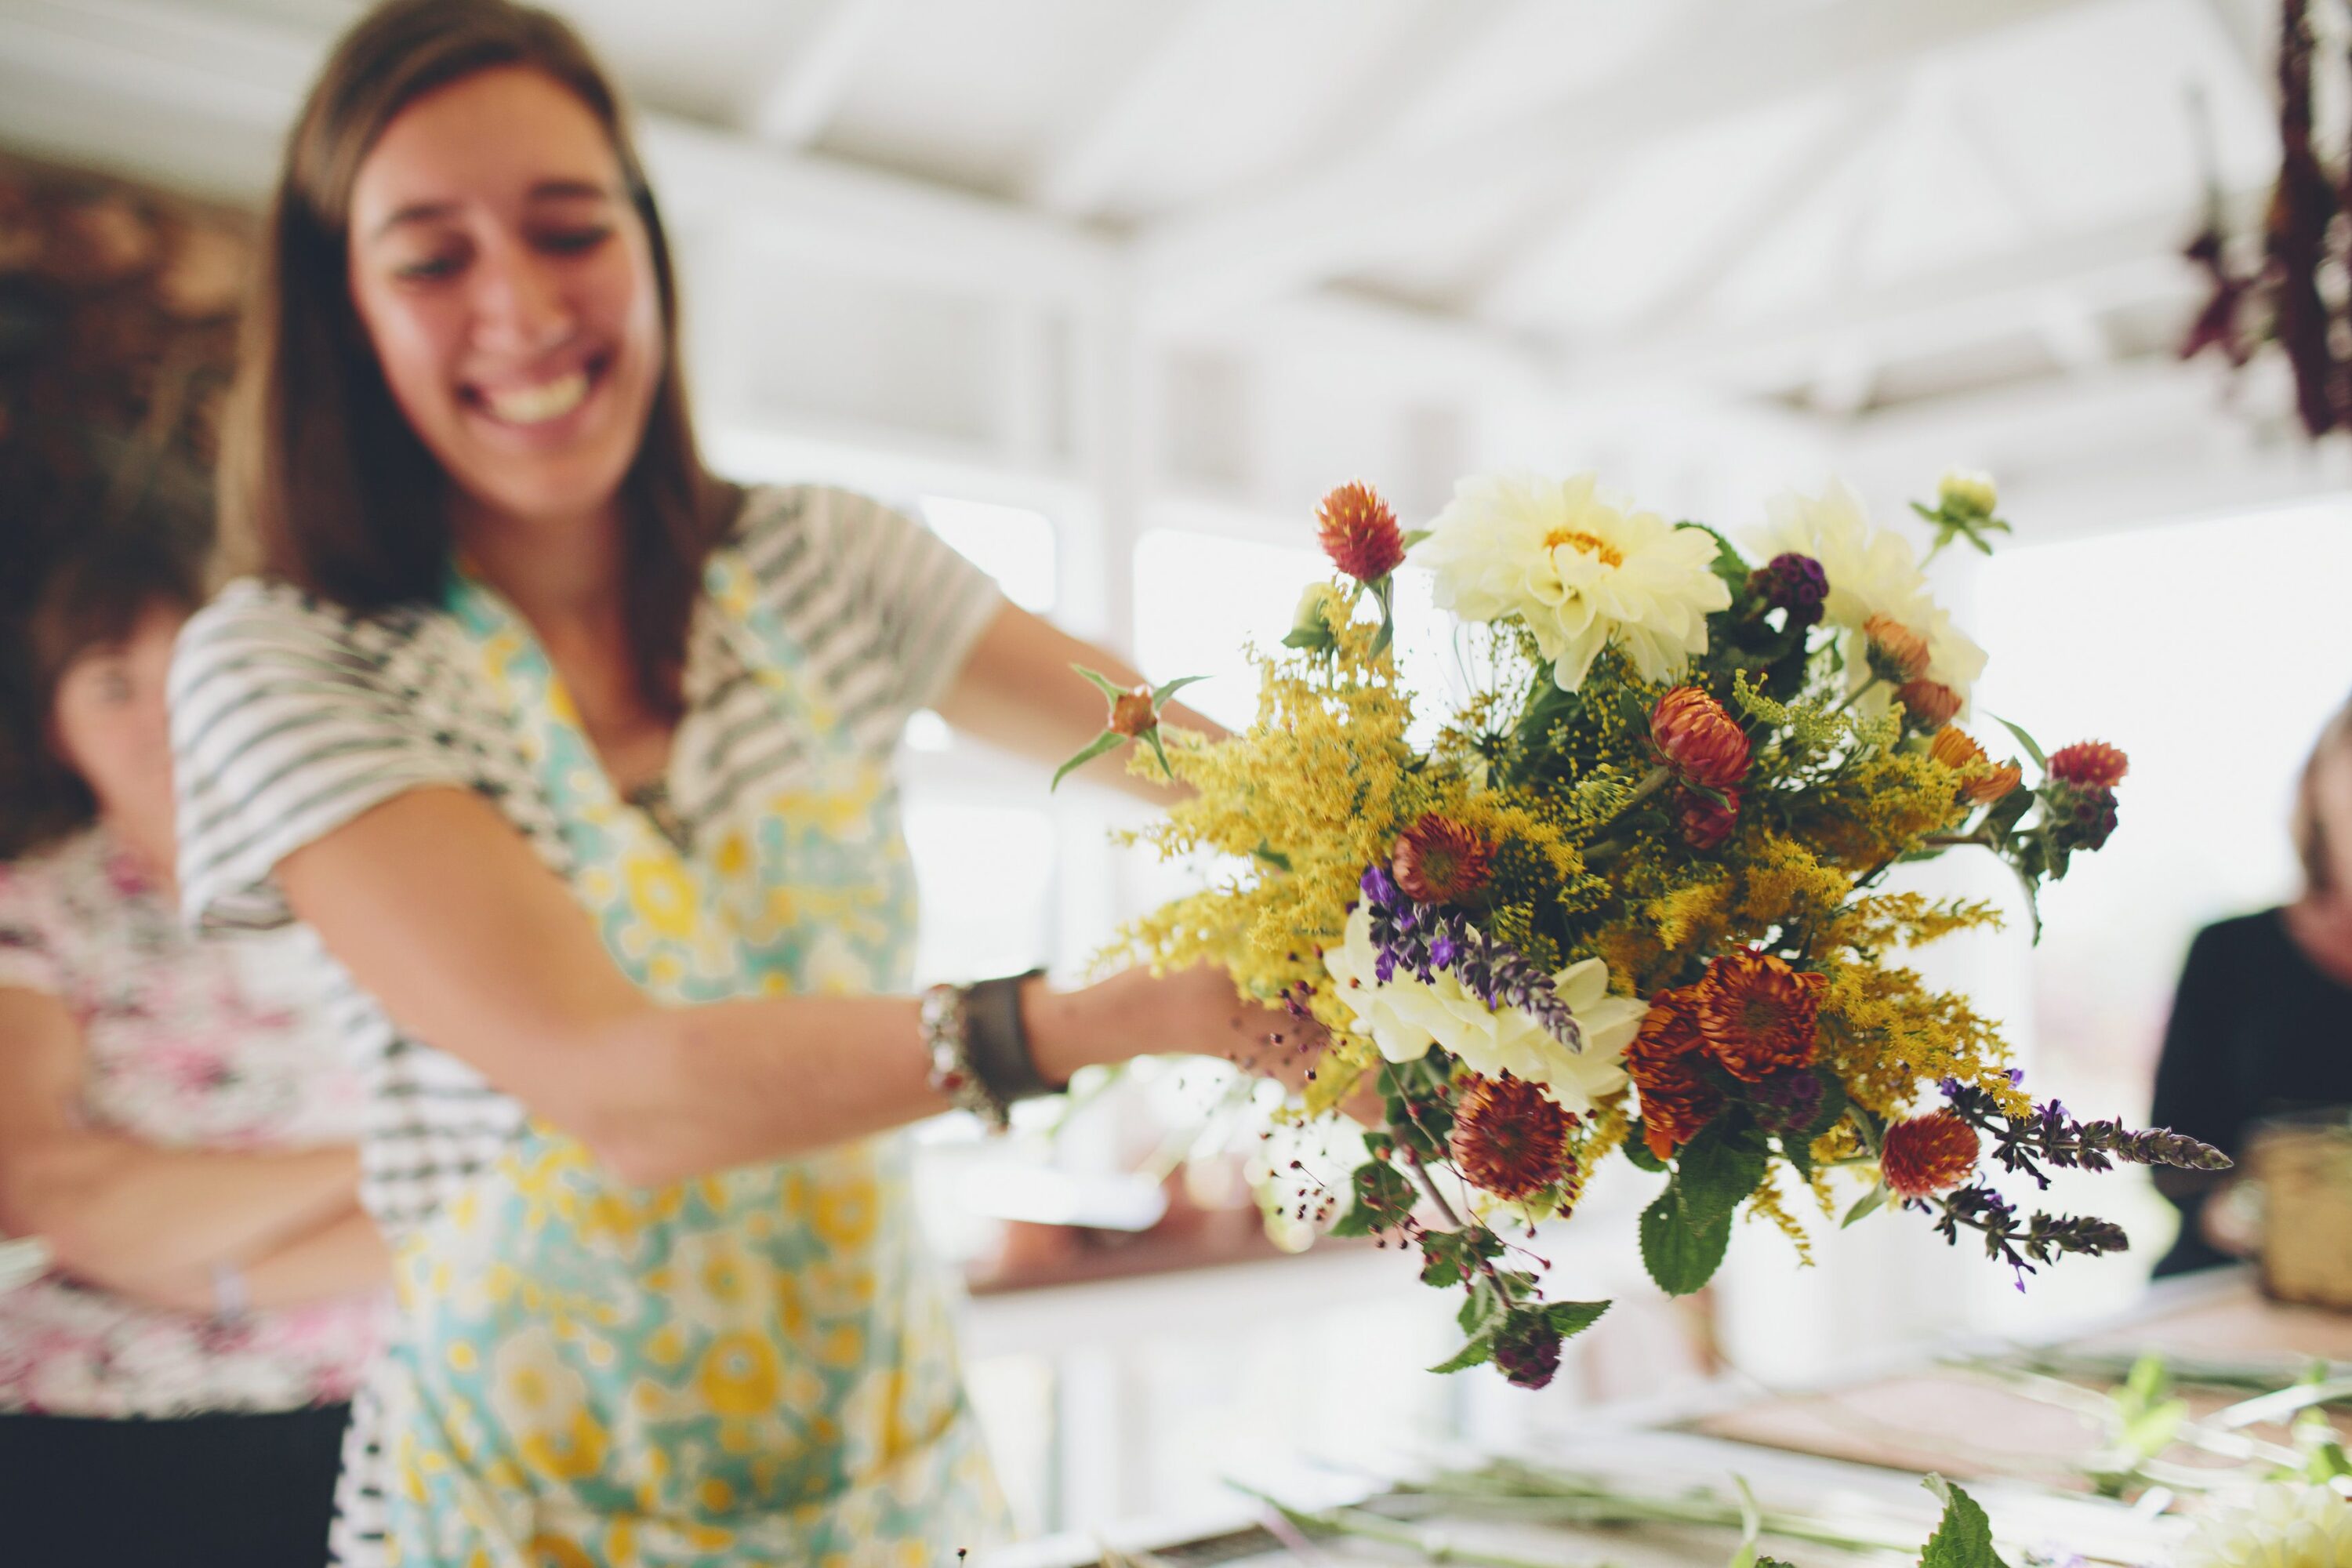 Erin Benzakein smiling and holding a bouquet